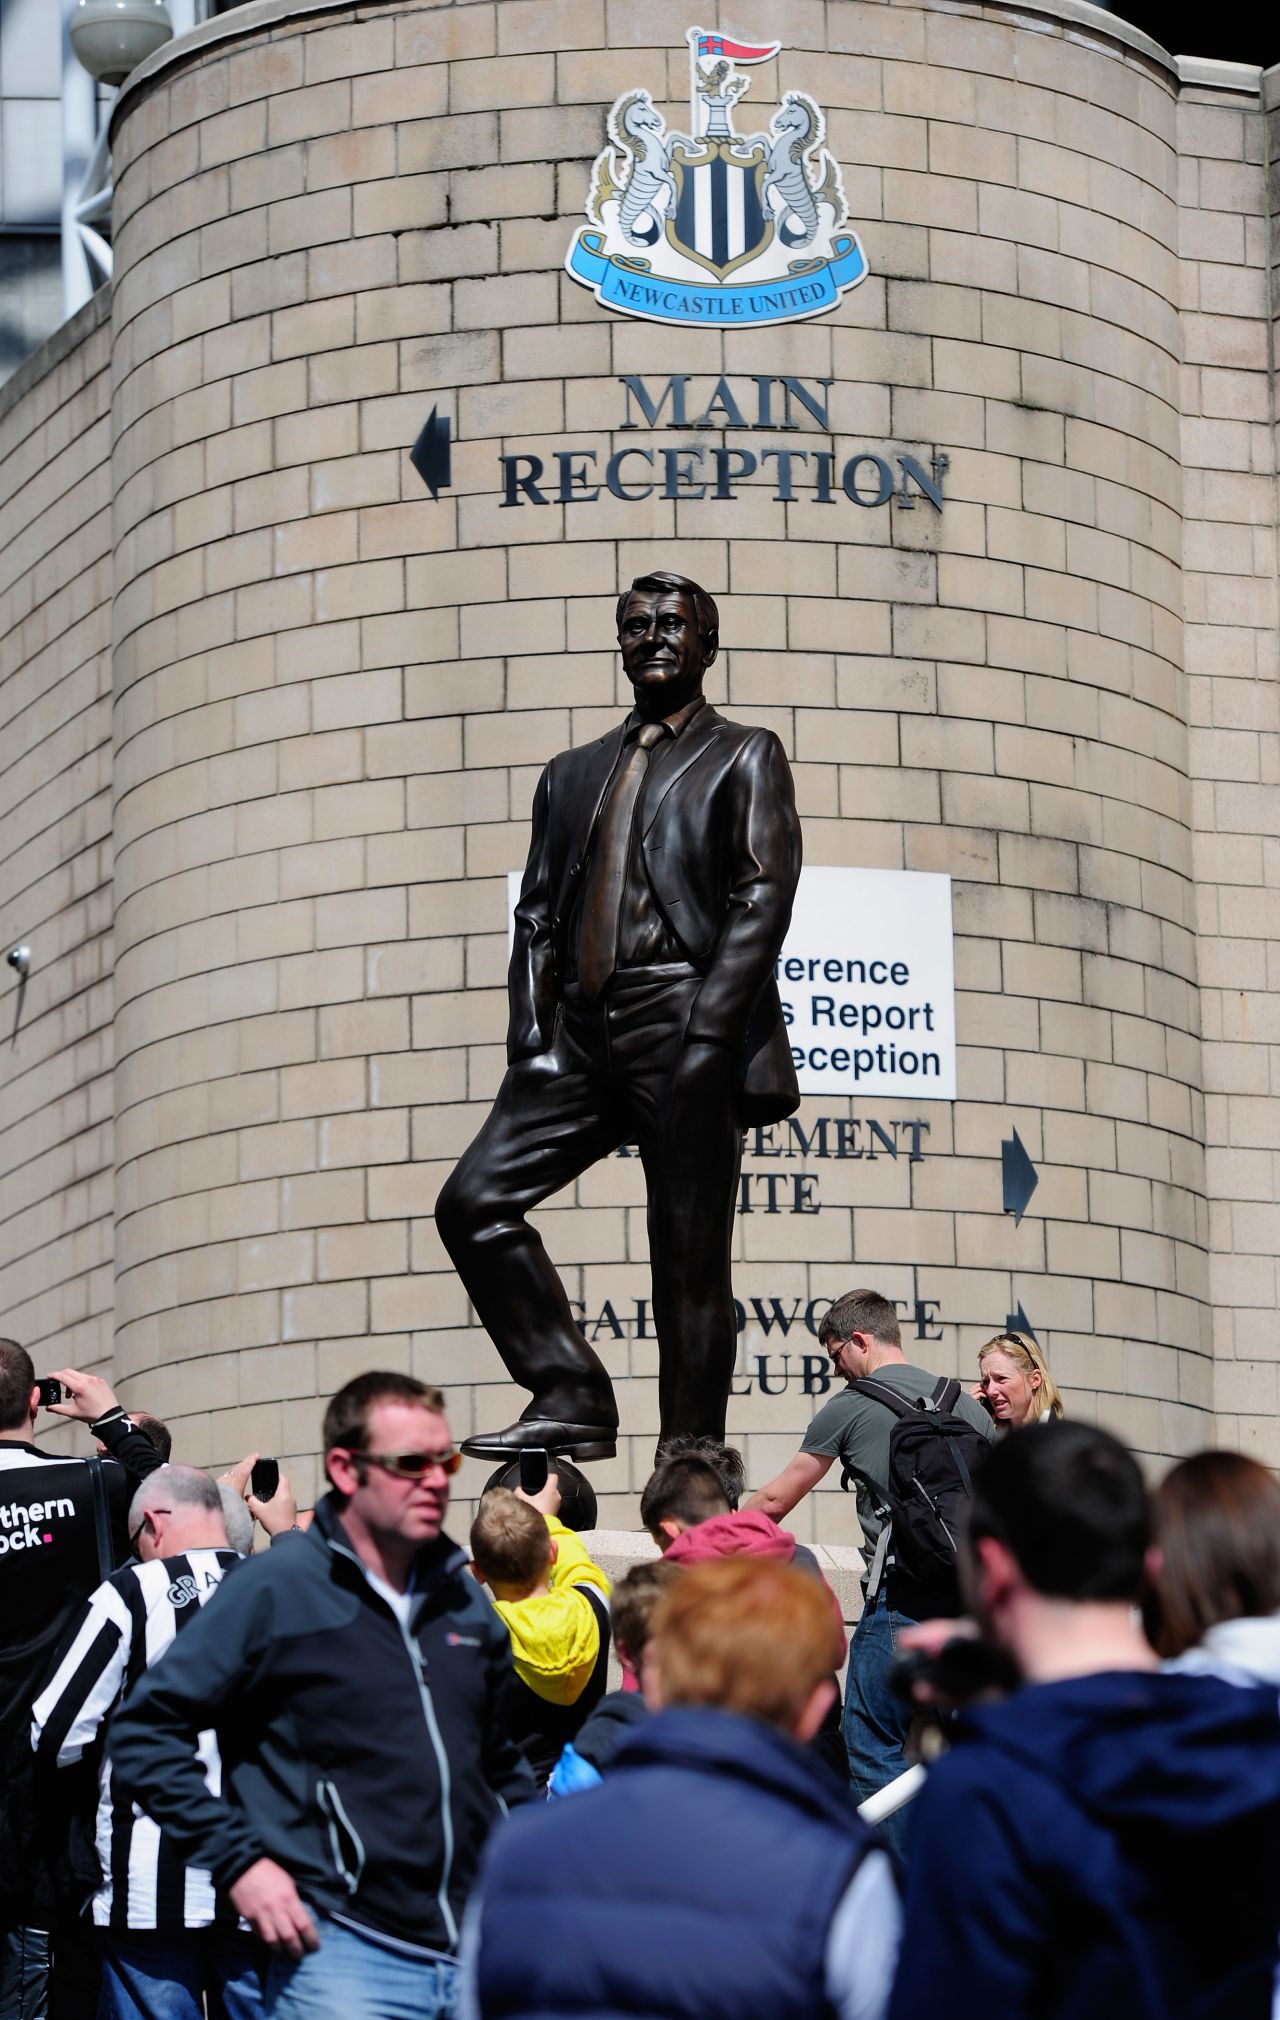 A number of other English clubs have commissioned artworks to remember former managers, notably Bobby Robson, who managed a number of clubs including Ipswich Town, Barcelona and Newcastle United as well as England. This statue of Robson is outside Newcastle United's St James' Park.